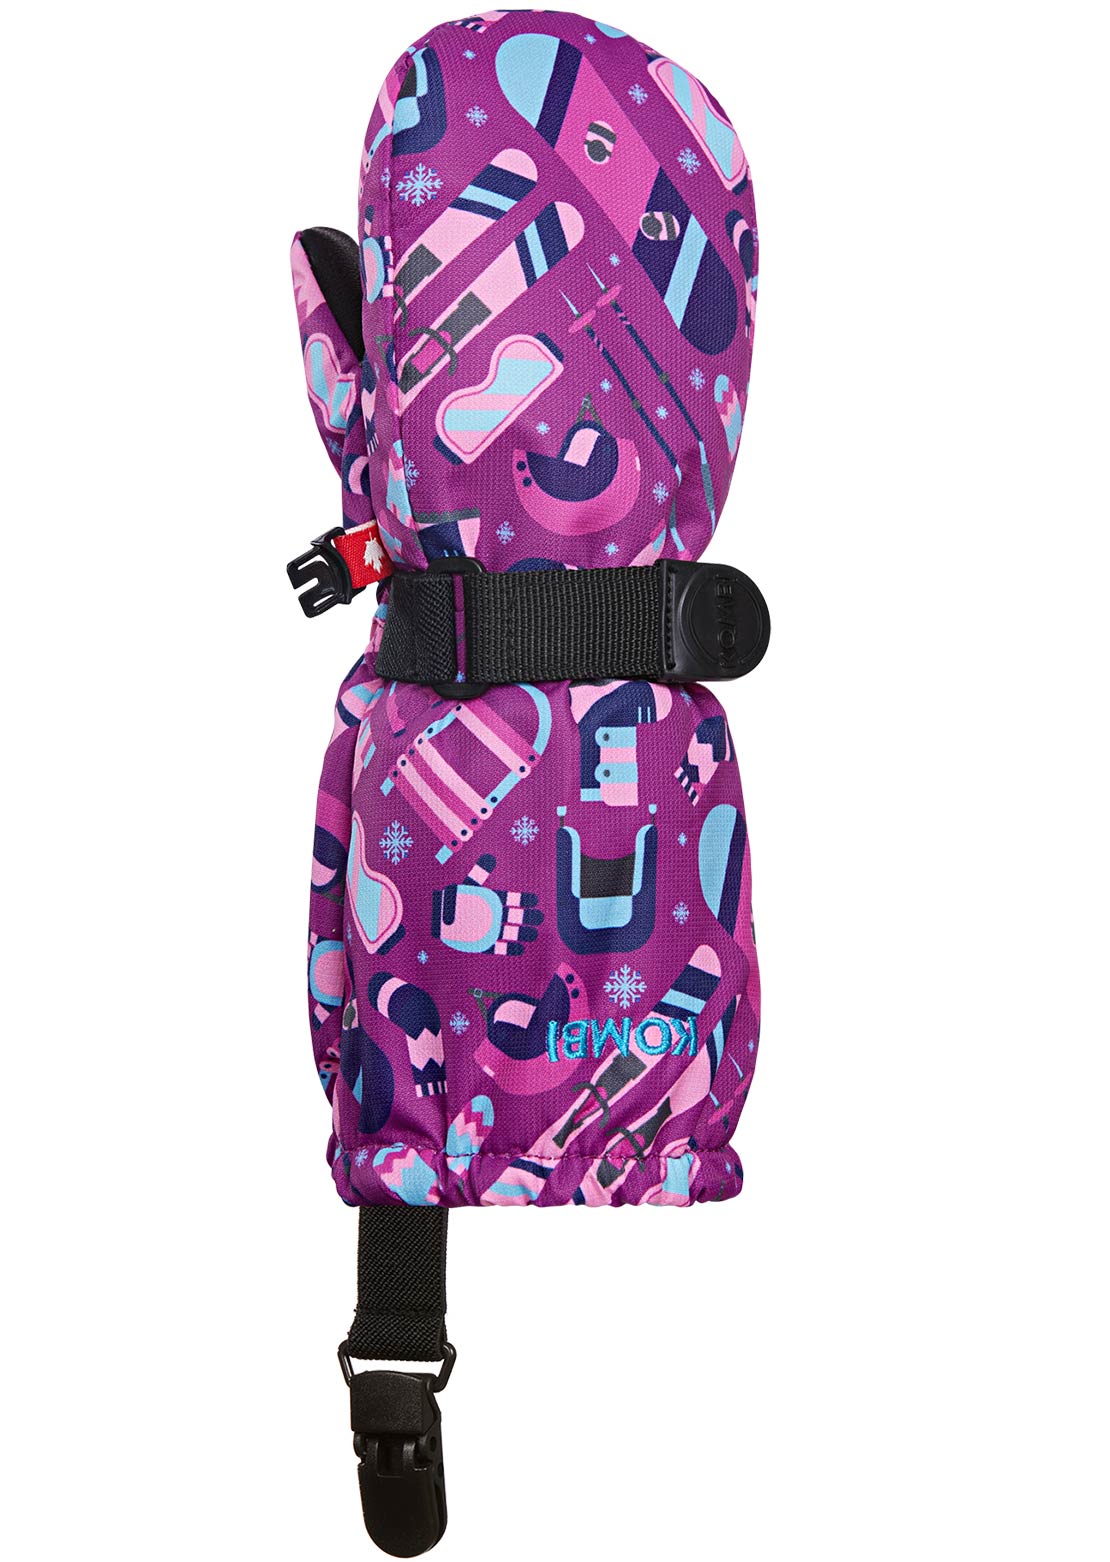 Kombi Toddler The Crazy Cariboo Mitts Orchid Ski Gear